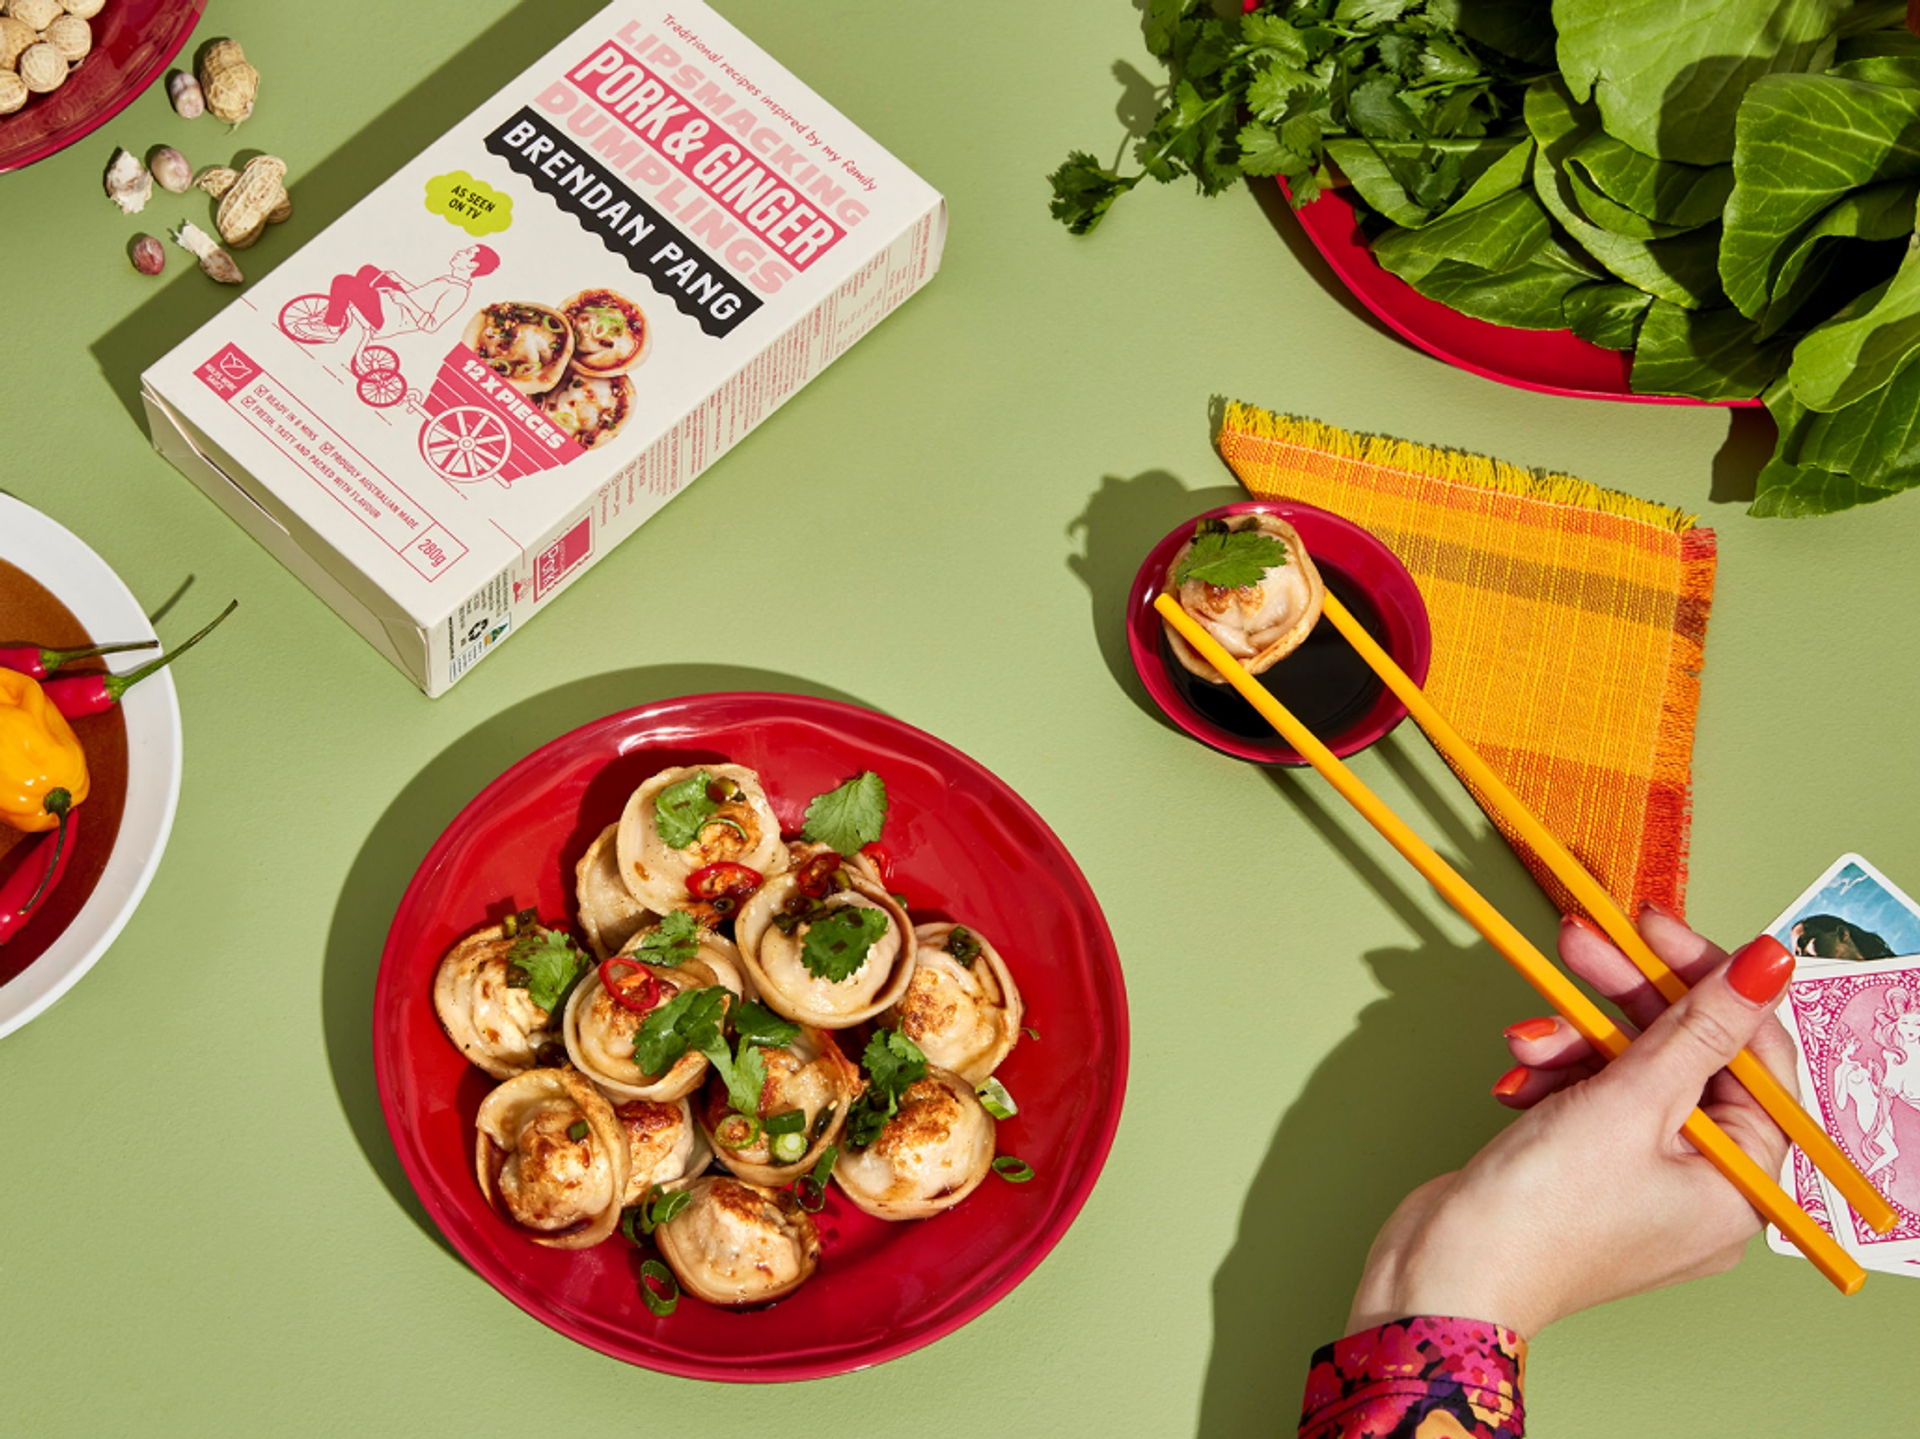 Cool yum cha lunch styling with Brendan Pang’s dumplings, by packaging design agency Our Revolution